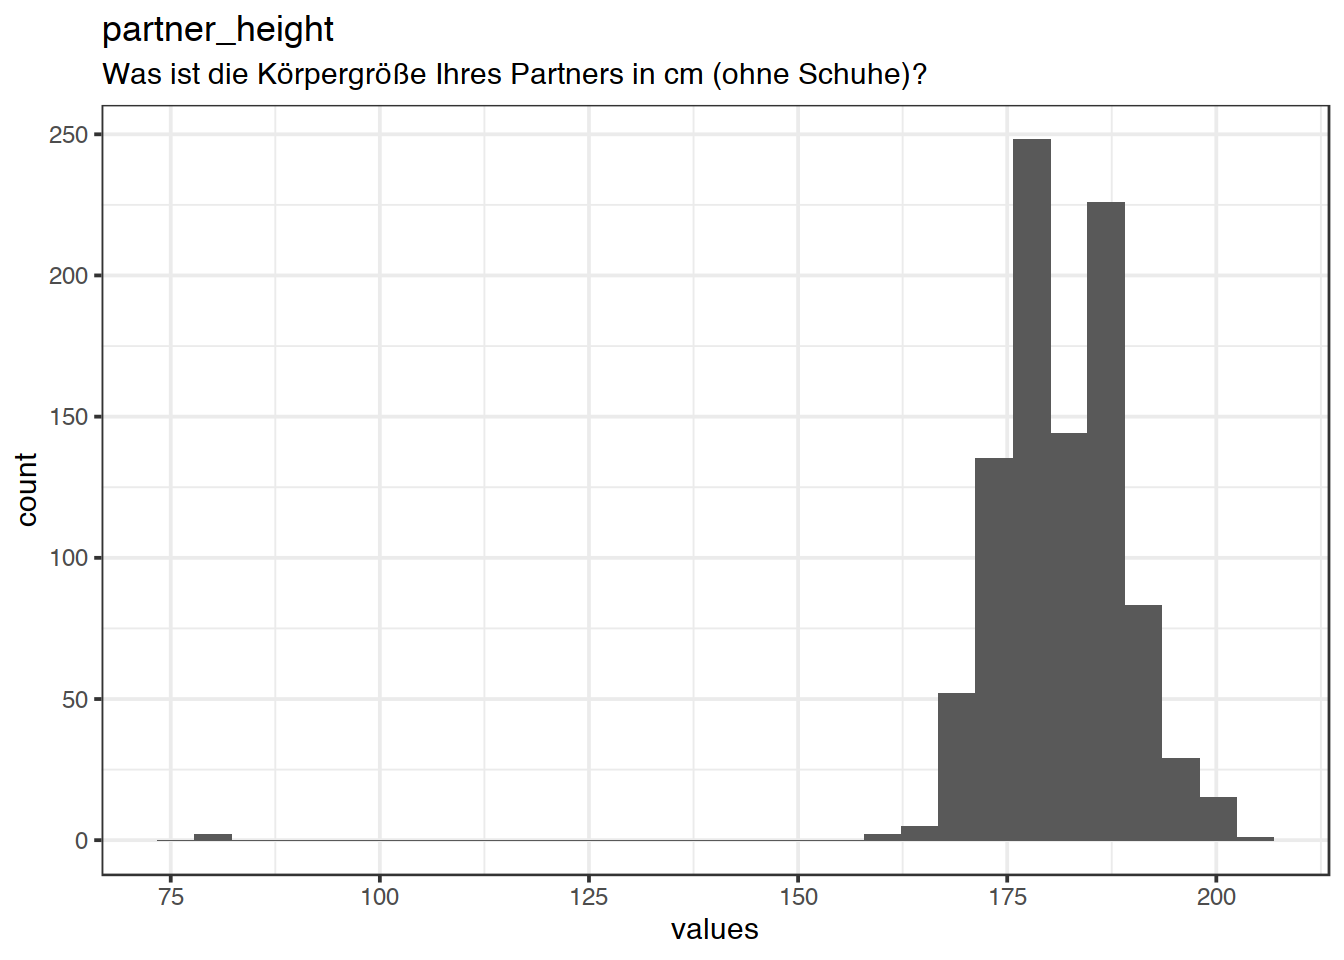 Distribution of values for partner_height